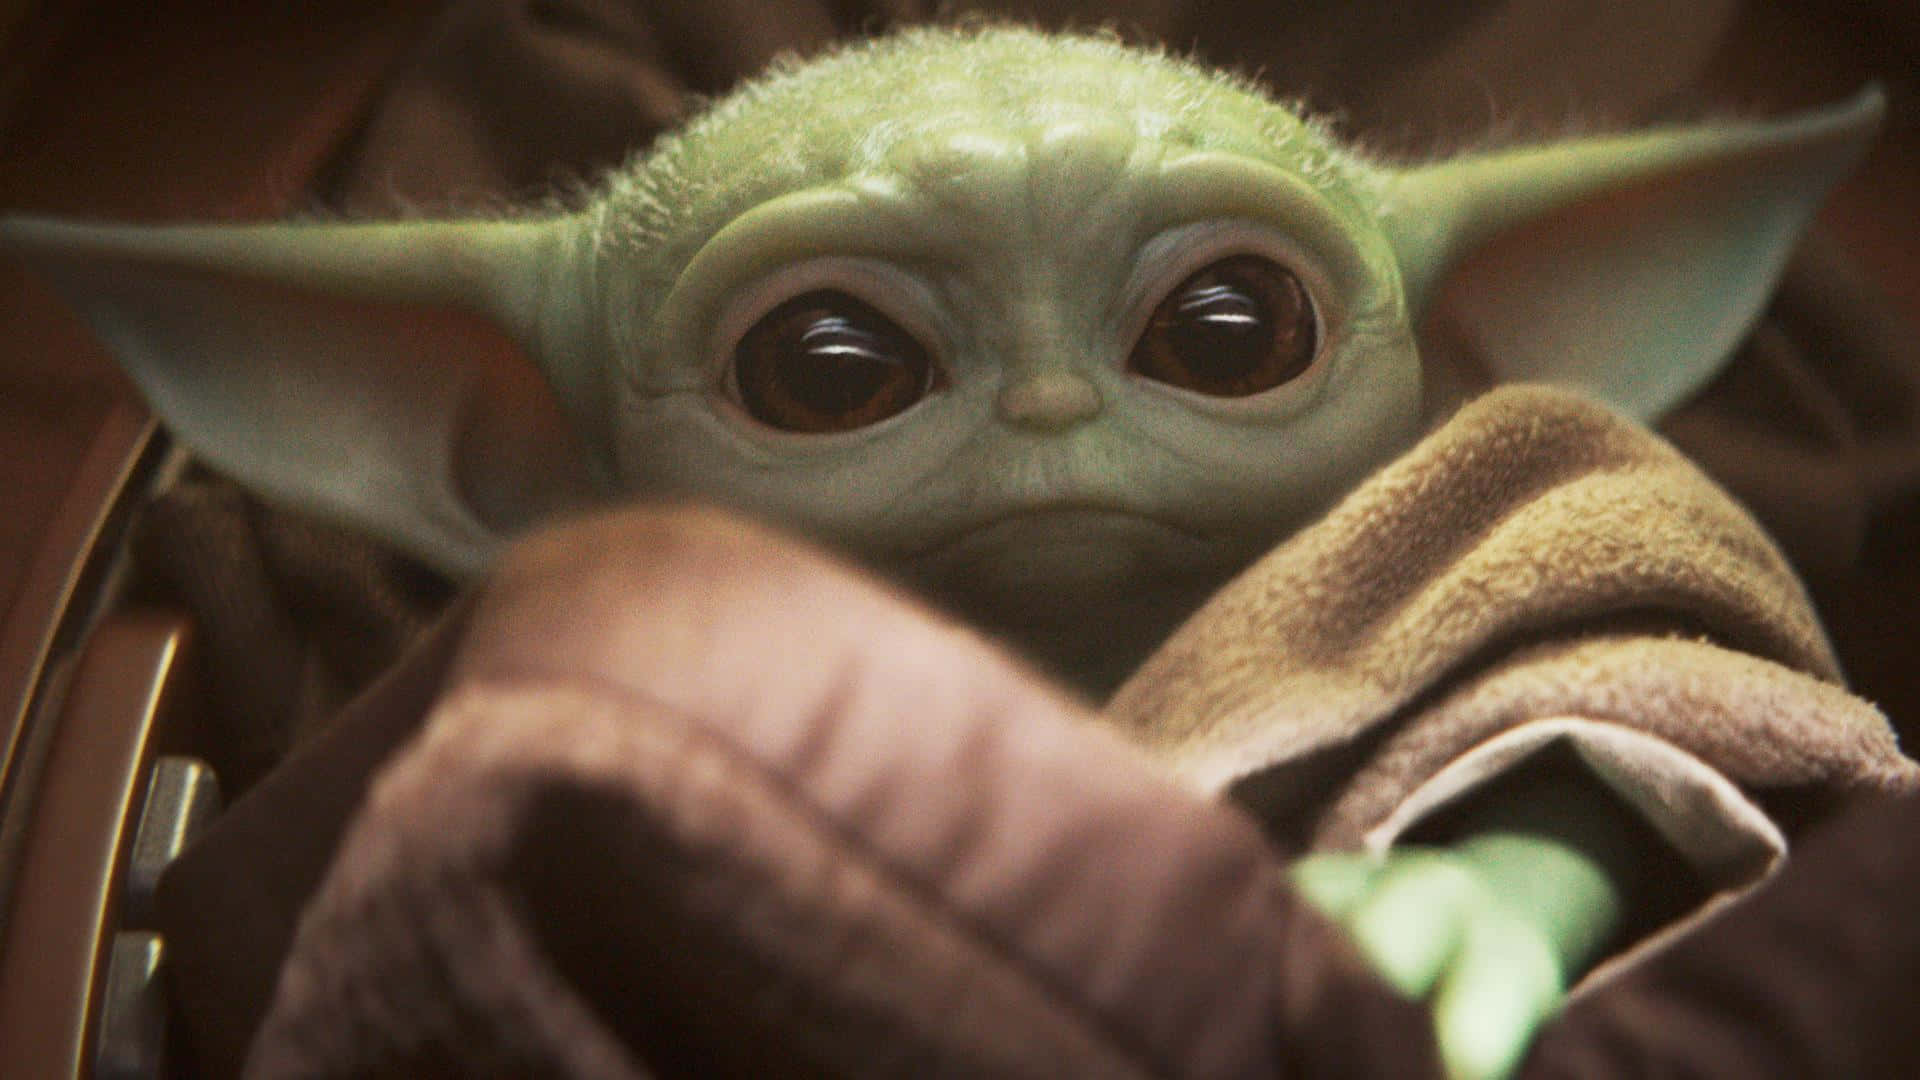 The Child, a.k.a. Baby Yoda, from the hit Disney+ show The Mandalorian Wallpaper